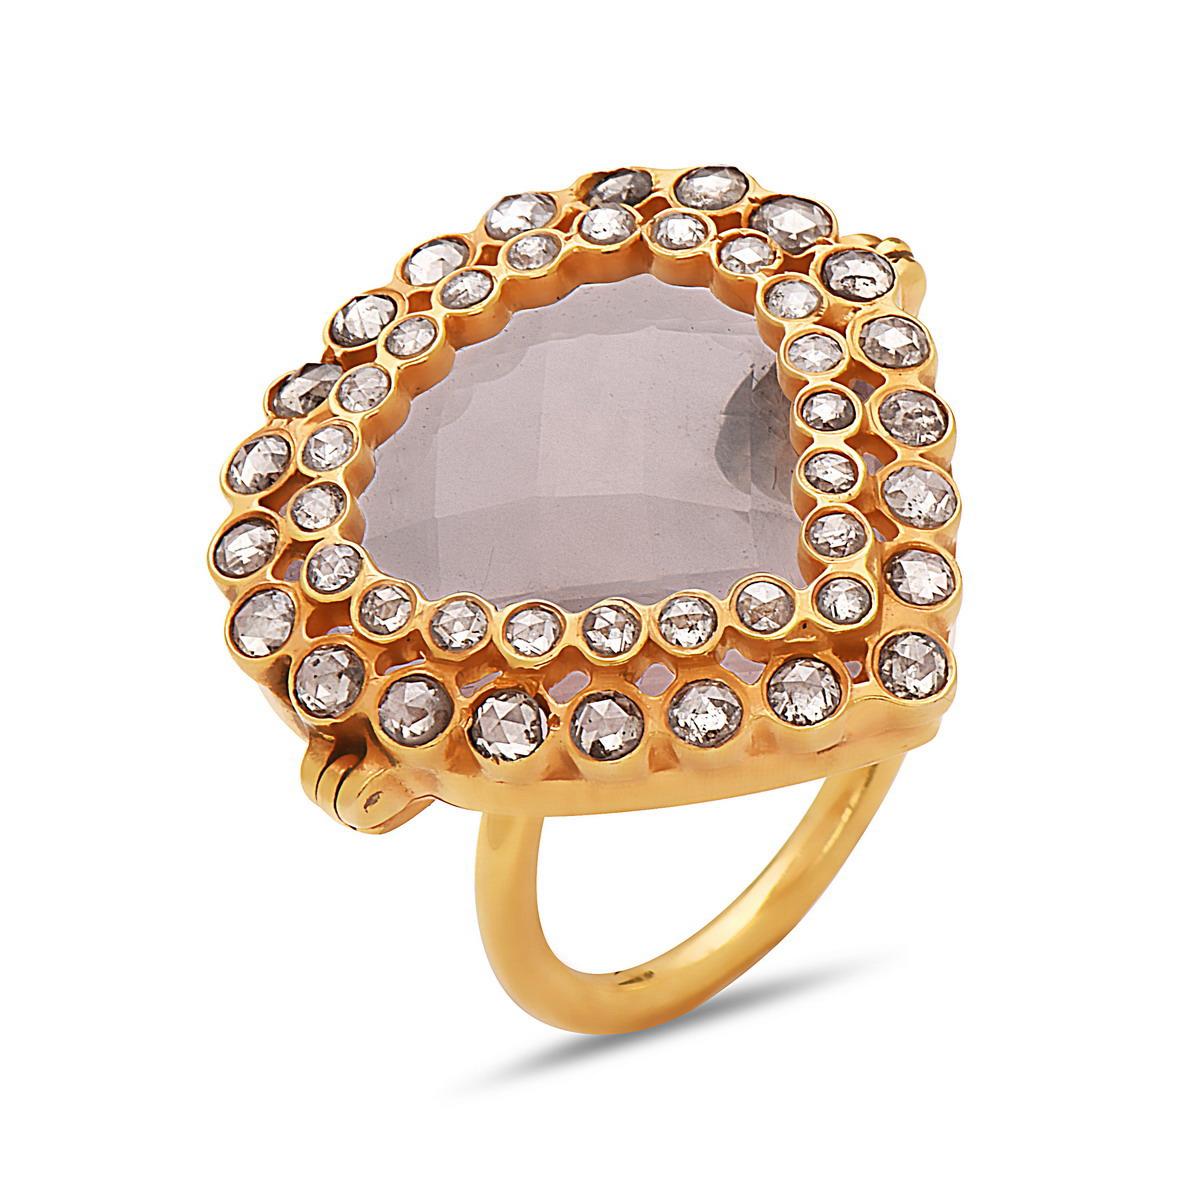 Rose Cut Pear Shaped Rose Quartz Cocktail Ring With Diamonds Made In 18k Yellow Gold For Sale